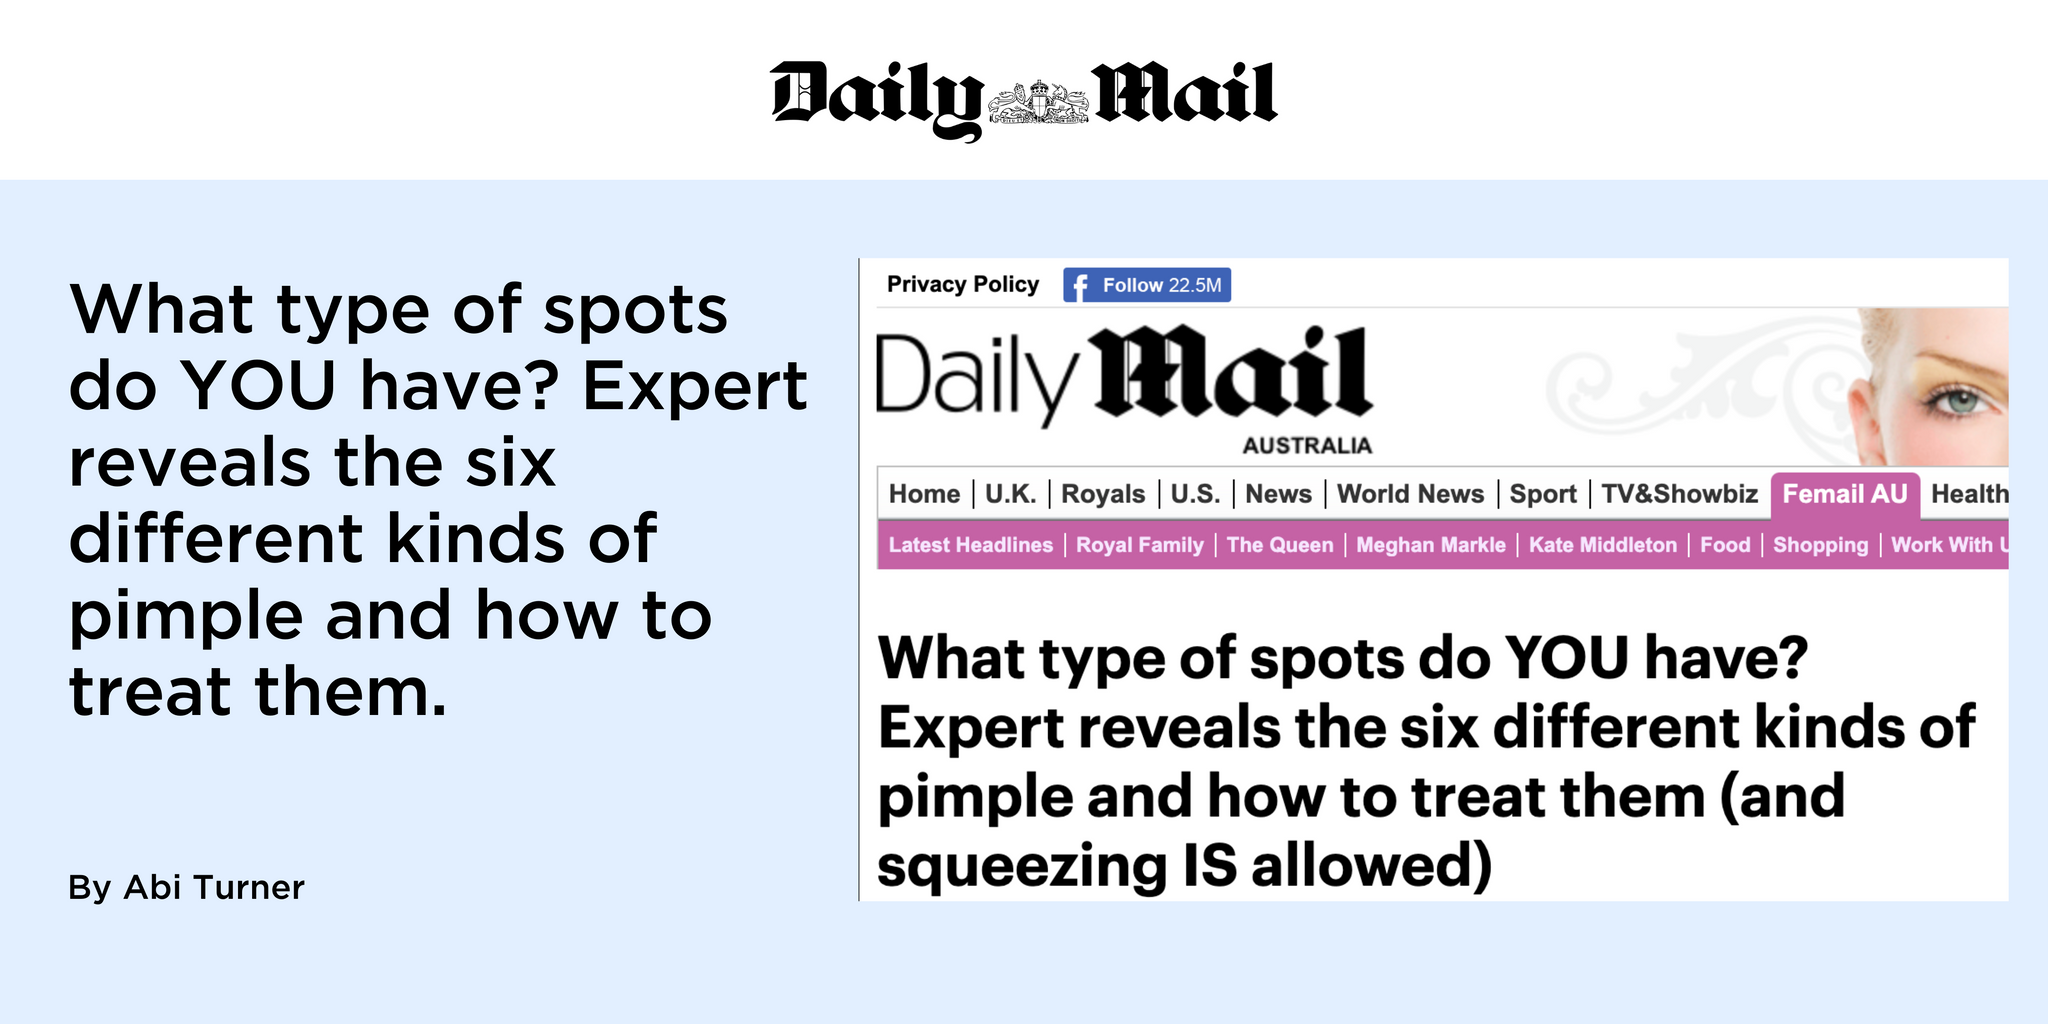 What type of spots do YOU have? Expert reveals the six different kinds of pimple and how to treat them